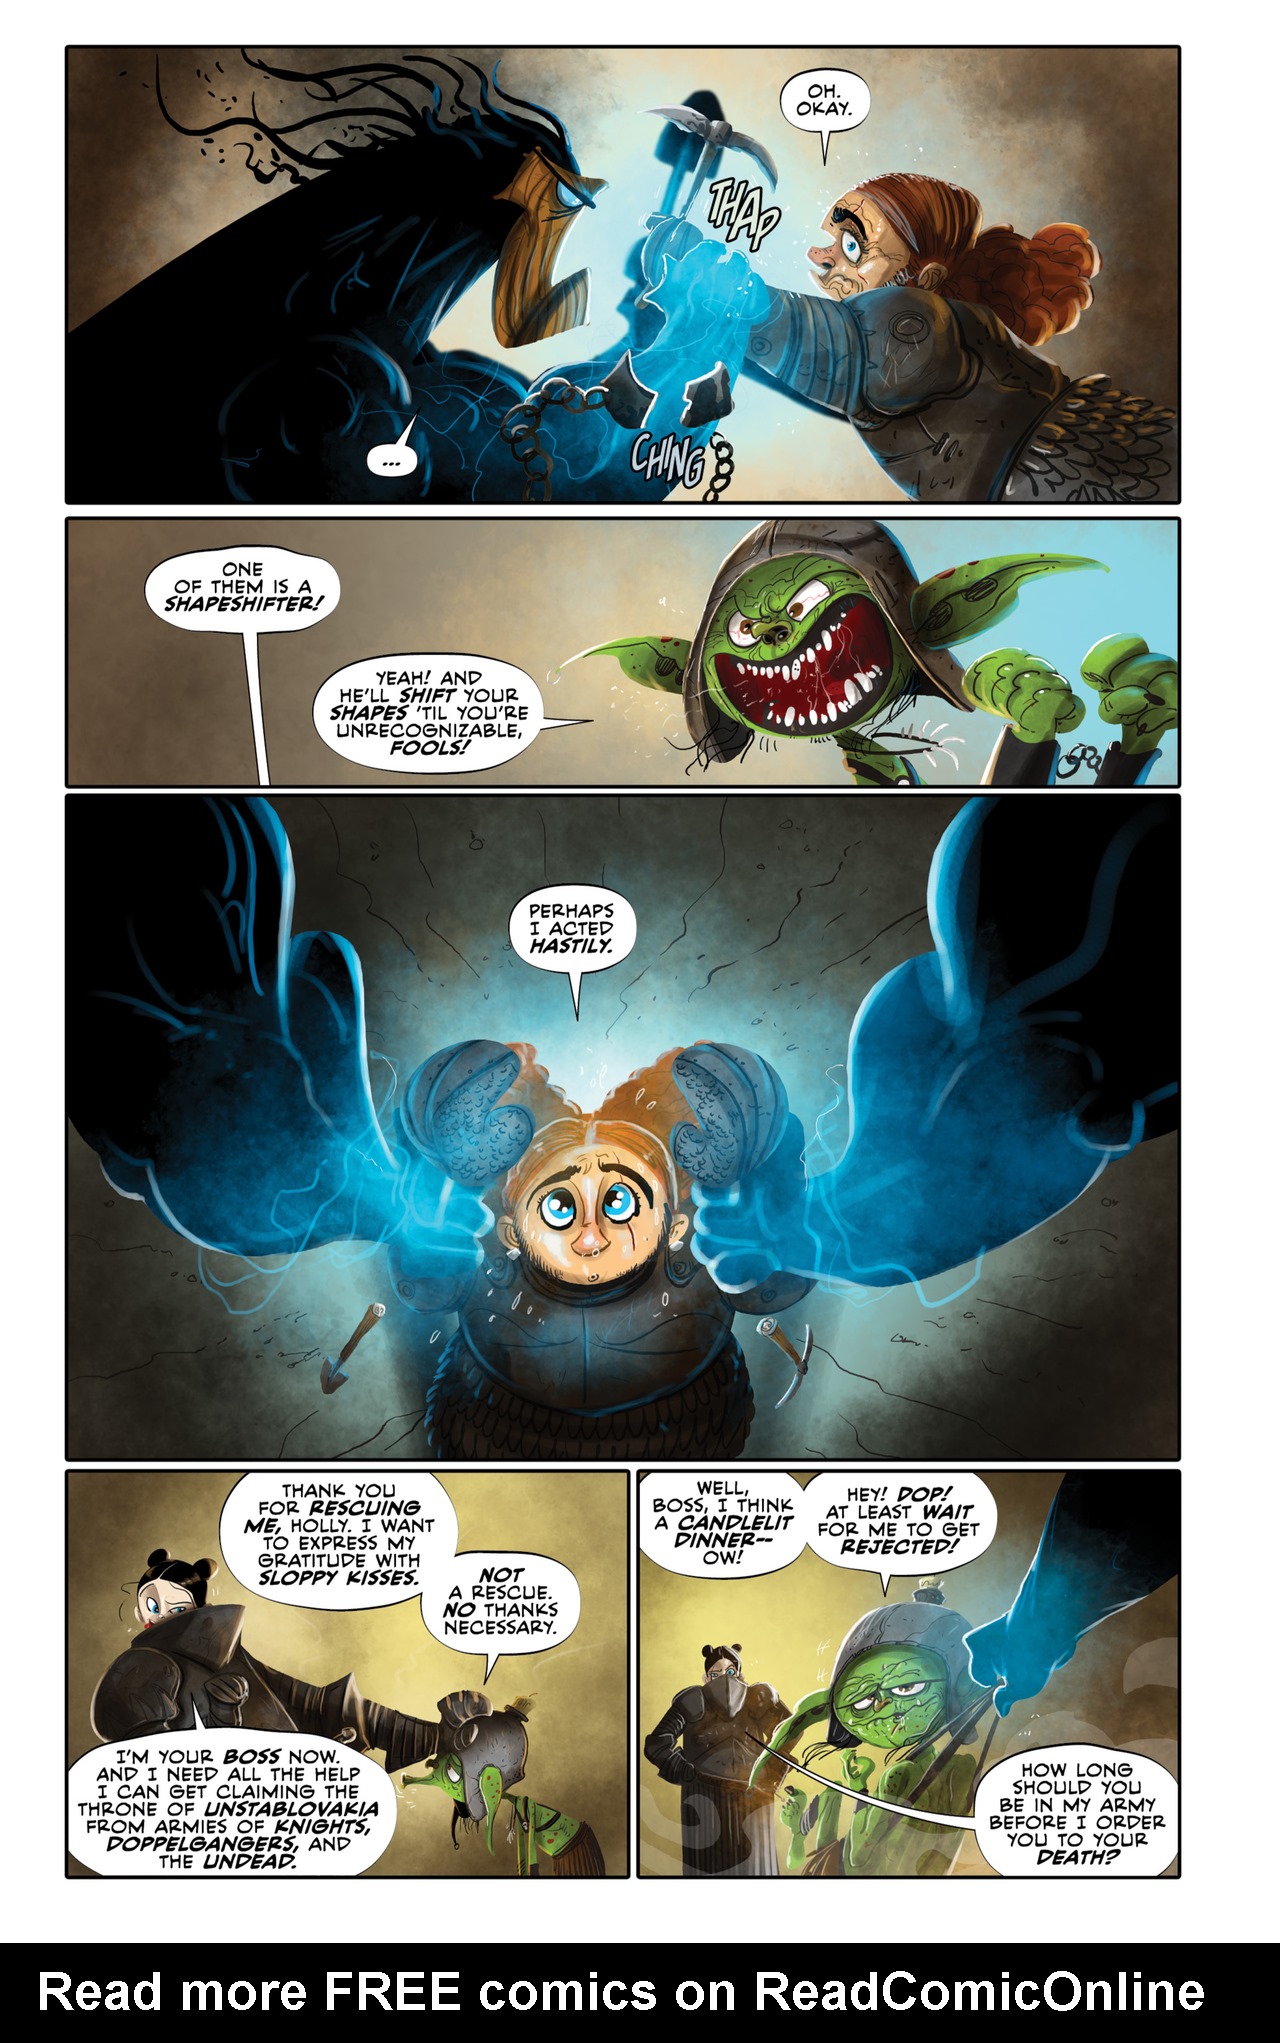 Read online Claim comic -  Issue #2 - 6